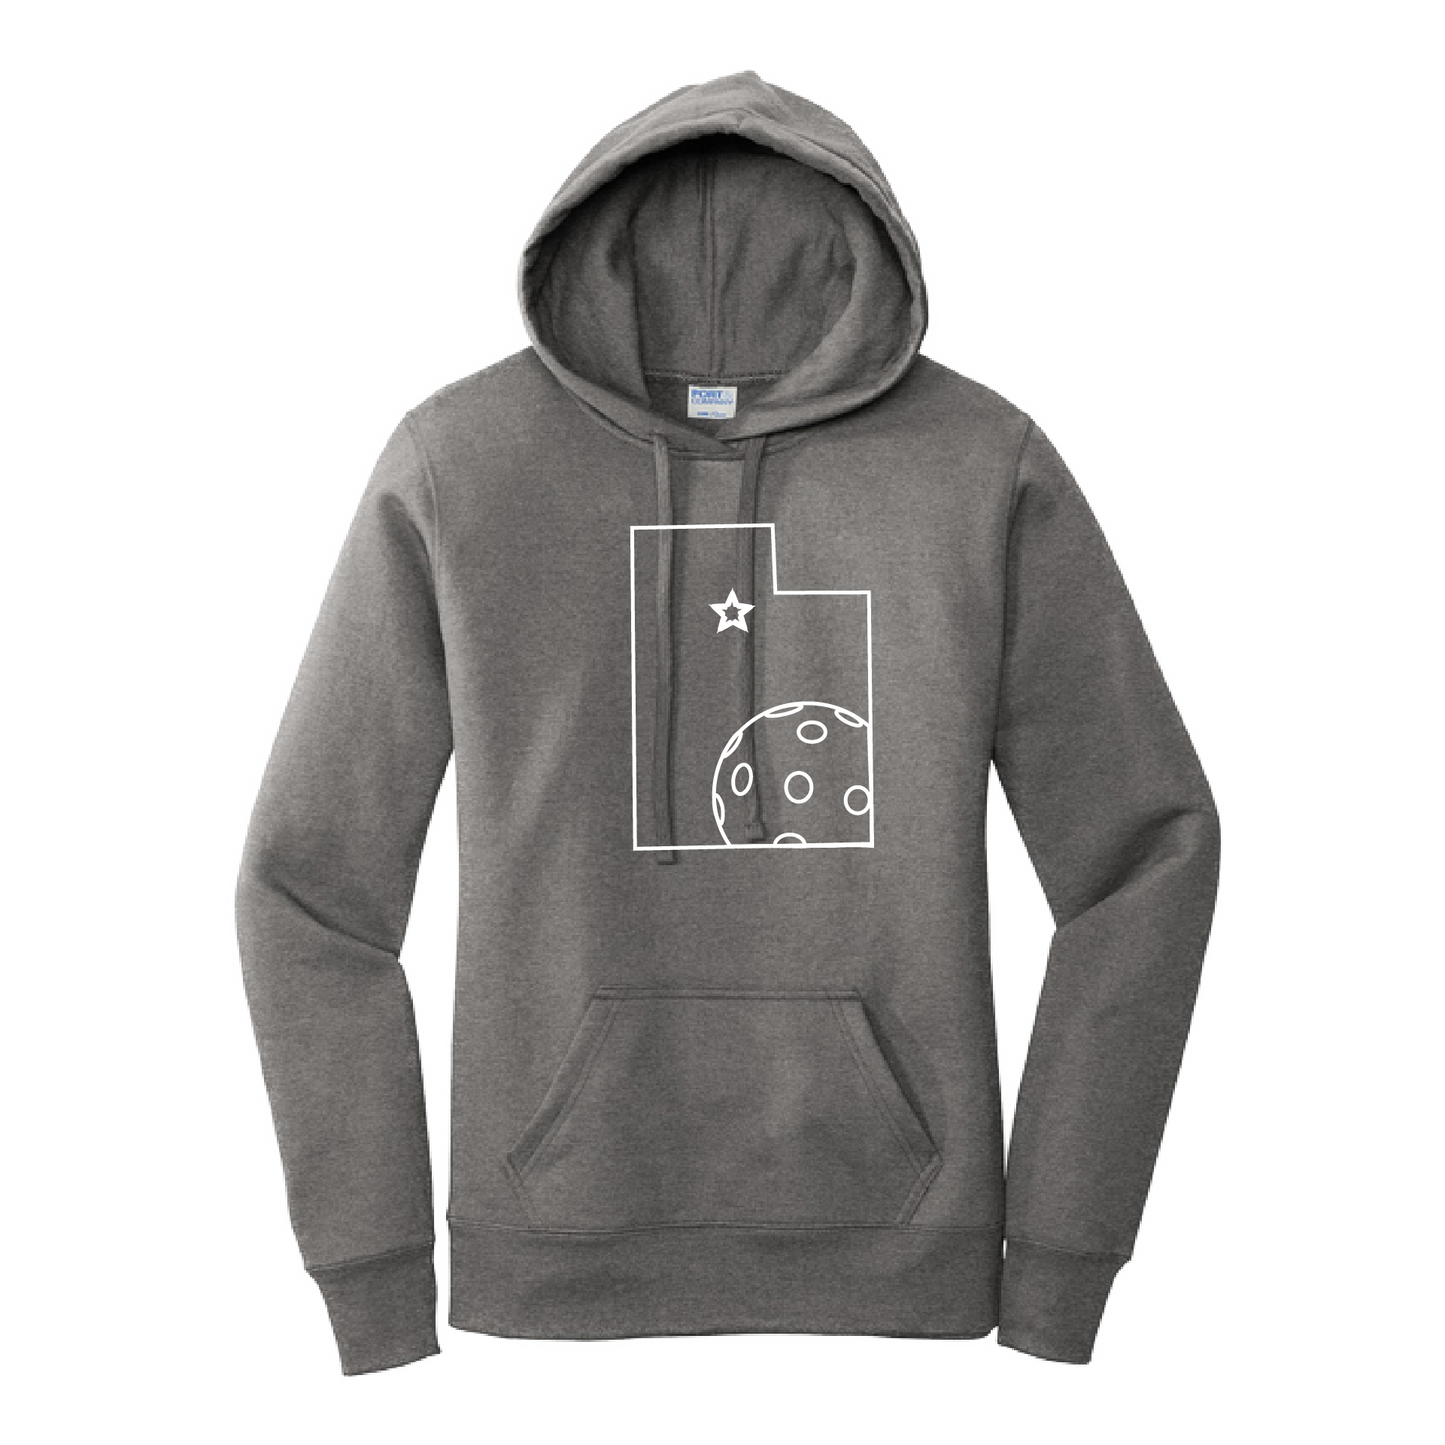 Pickleball Design: Utah Pickleball  Women's Hooded pullover Sweatshirt  Turn up the volume in this Women's Sweatshirts with its perfect mix of softness and attitude. Ultra soft lined inside with a lined hood also. This is fitted nicely for a women's figure. Front pouch pocket.